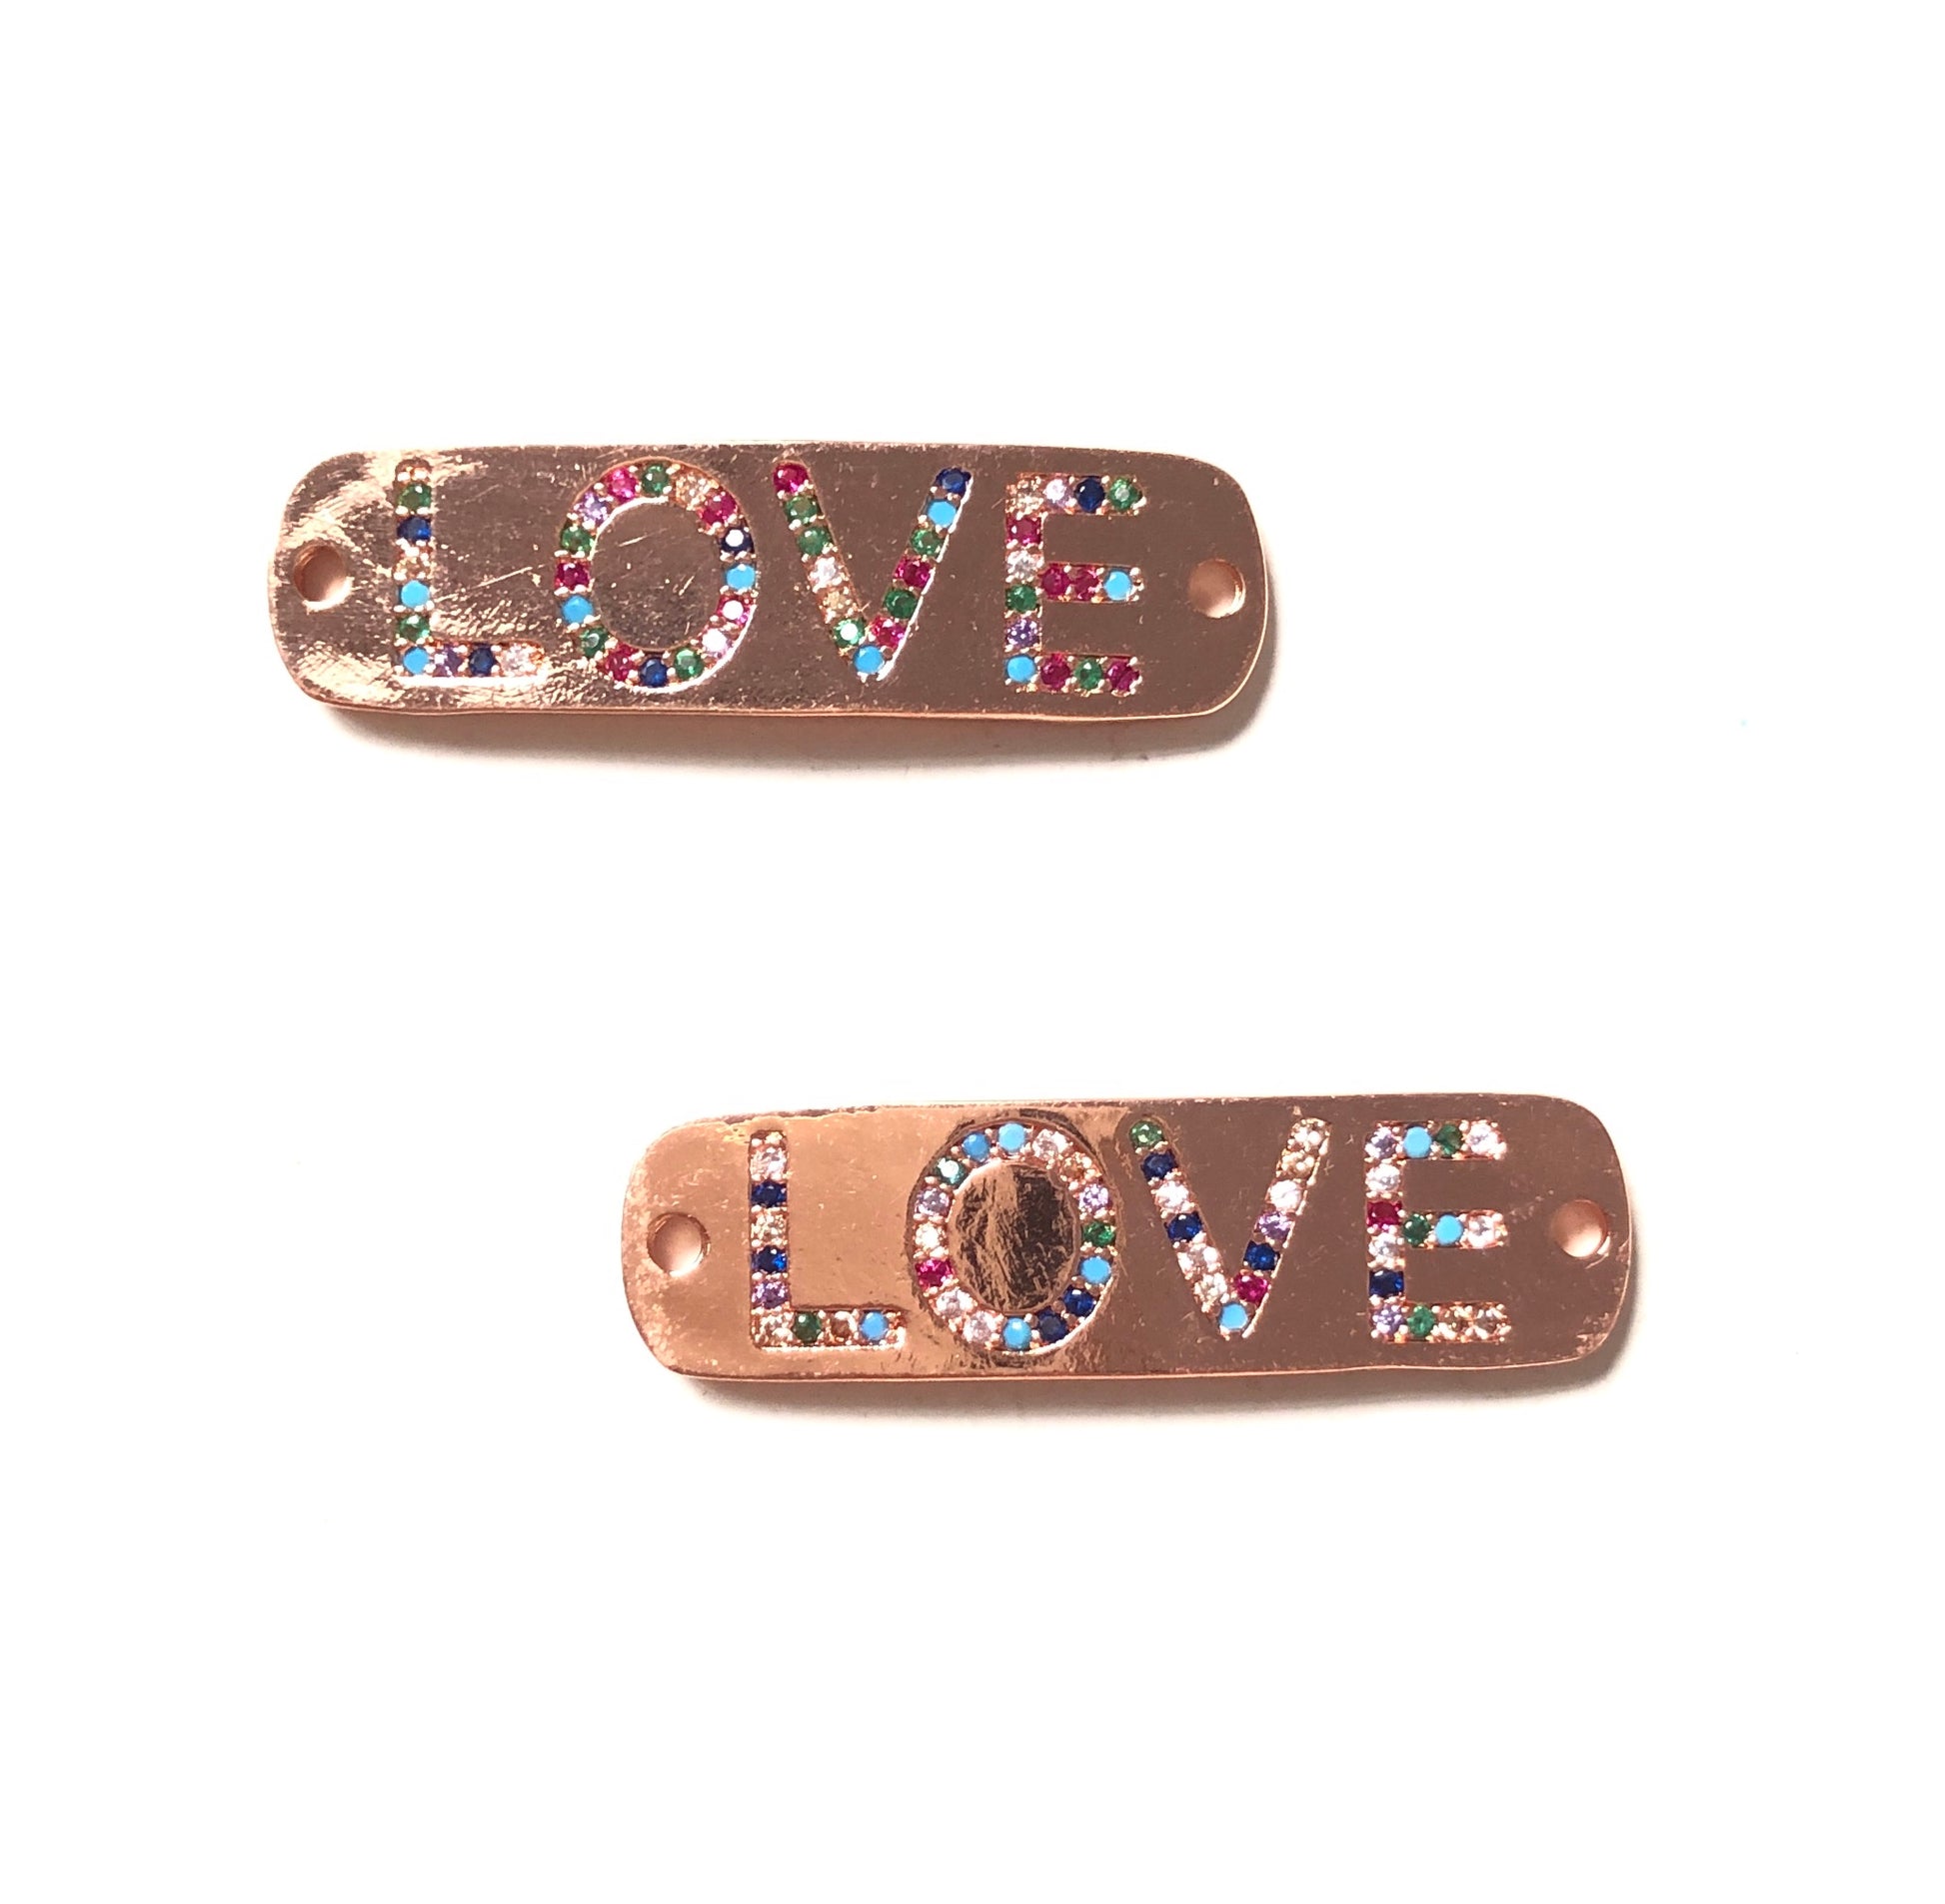 10pcs/lot 39*11mm CZ Paved LOVE Word Connectors Rose Gold CZ Paved Connectors Love Letters Word Connectors Charms Beads Beyond